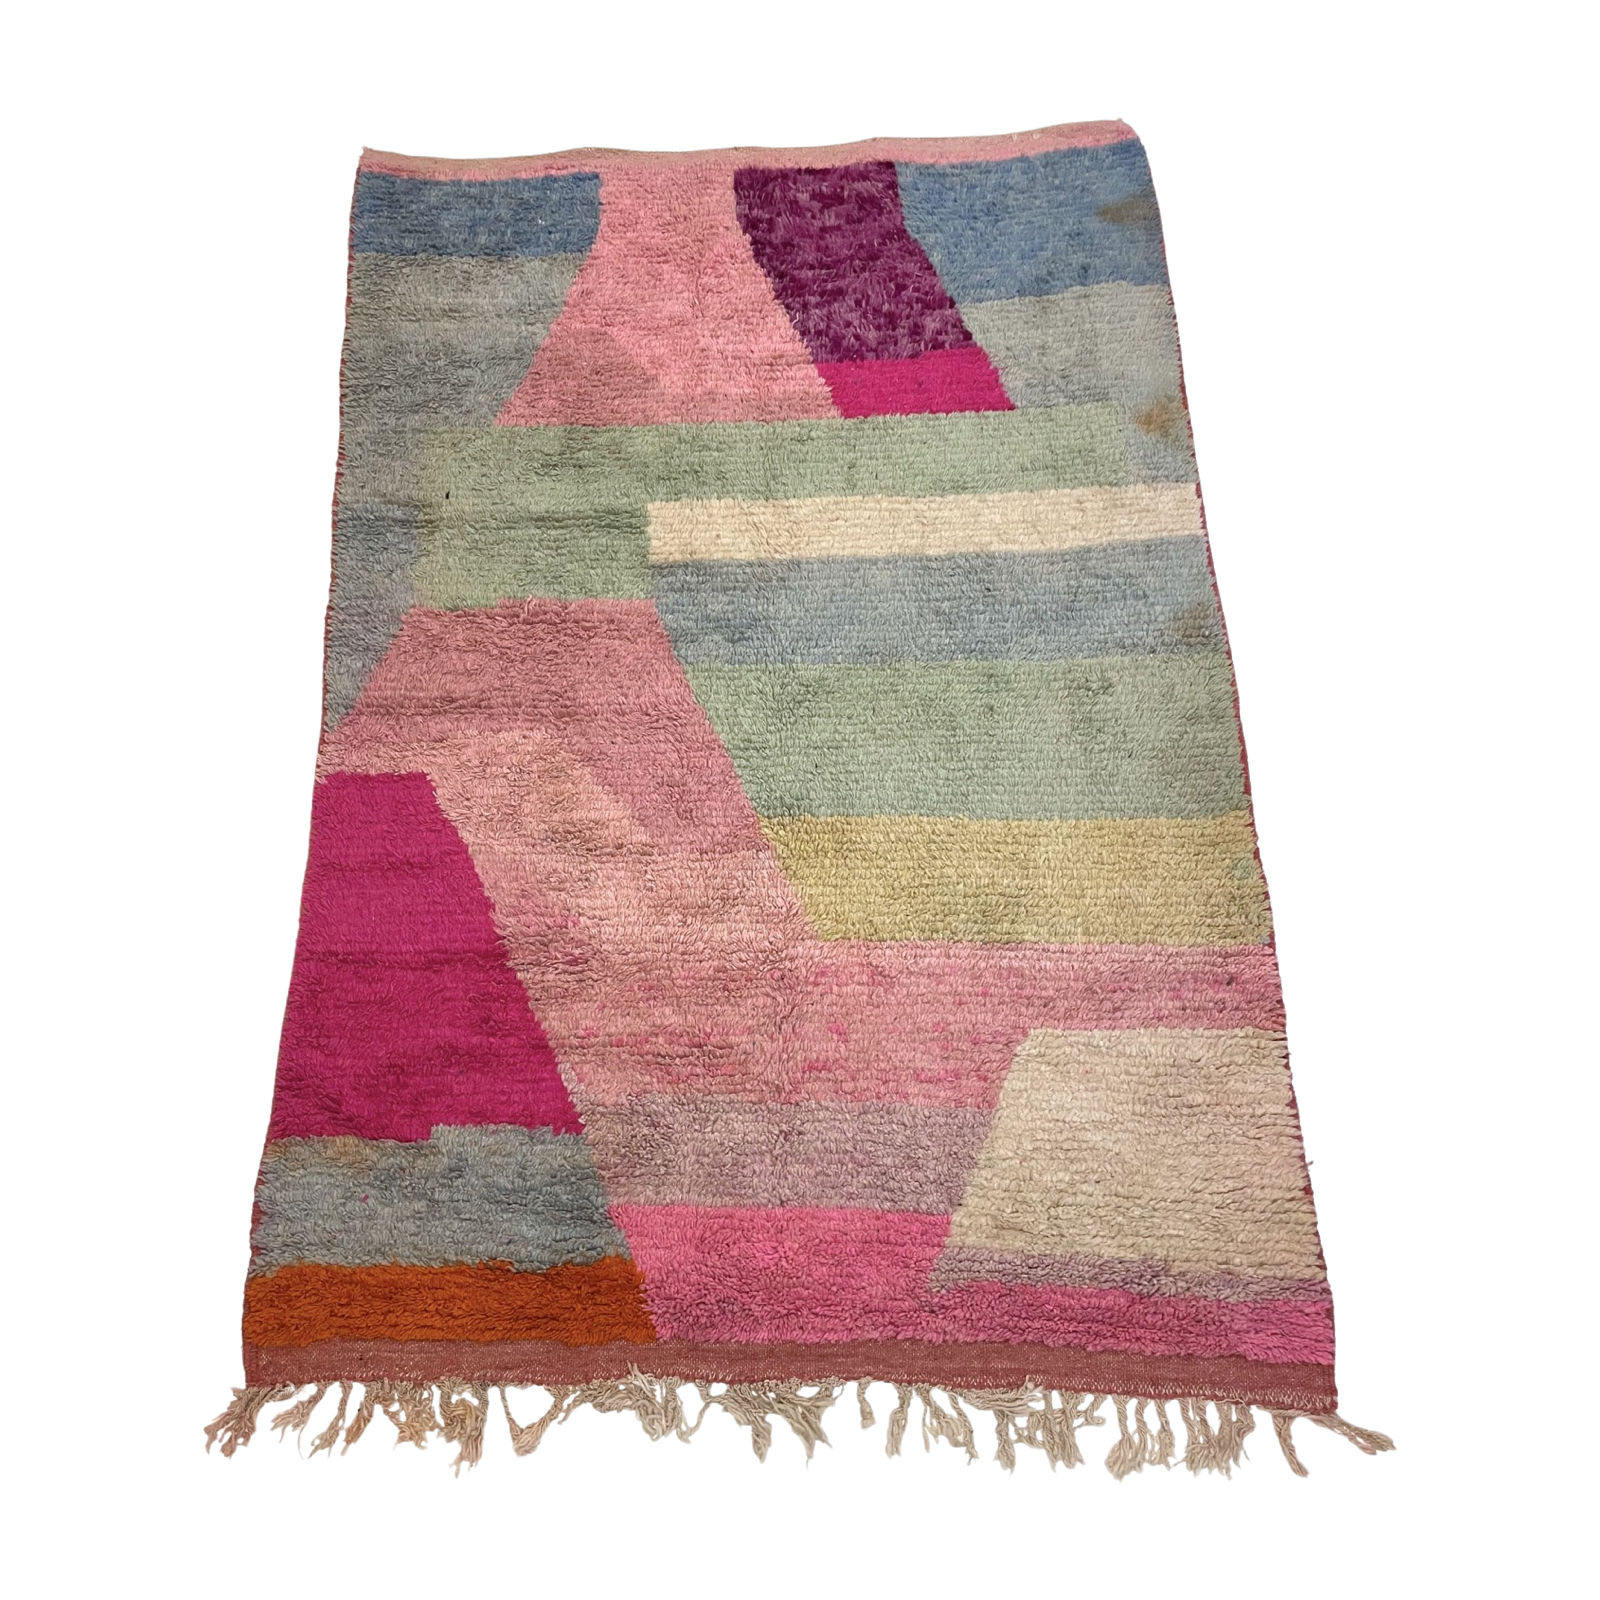 Colorful Moroccan kids' room rug in pinks, purples, blues, and greens - Kantara | Moroccan Rugs